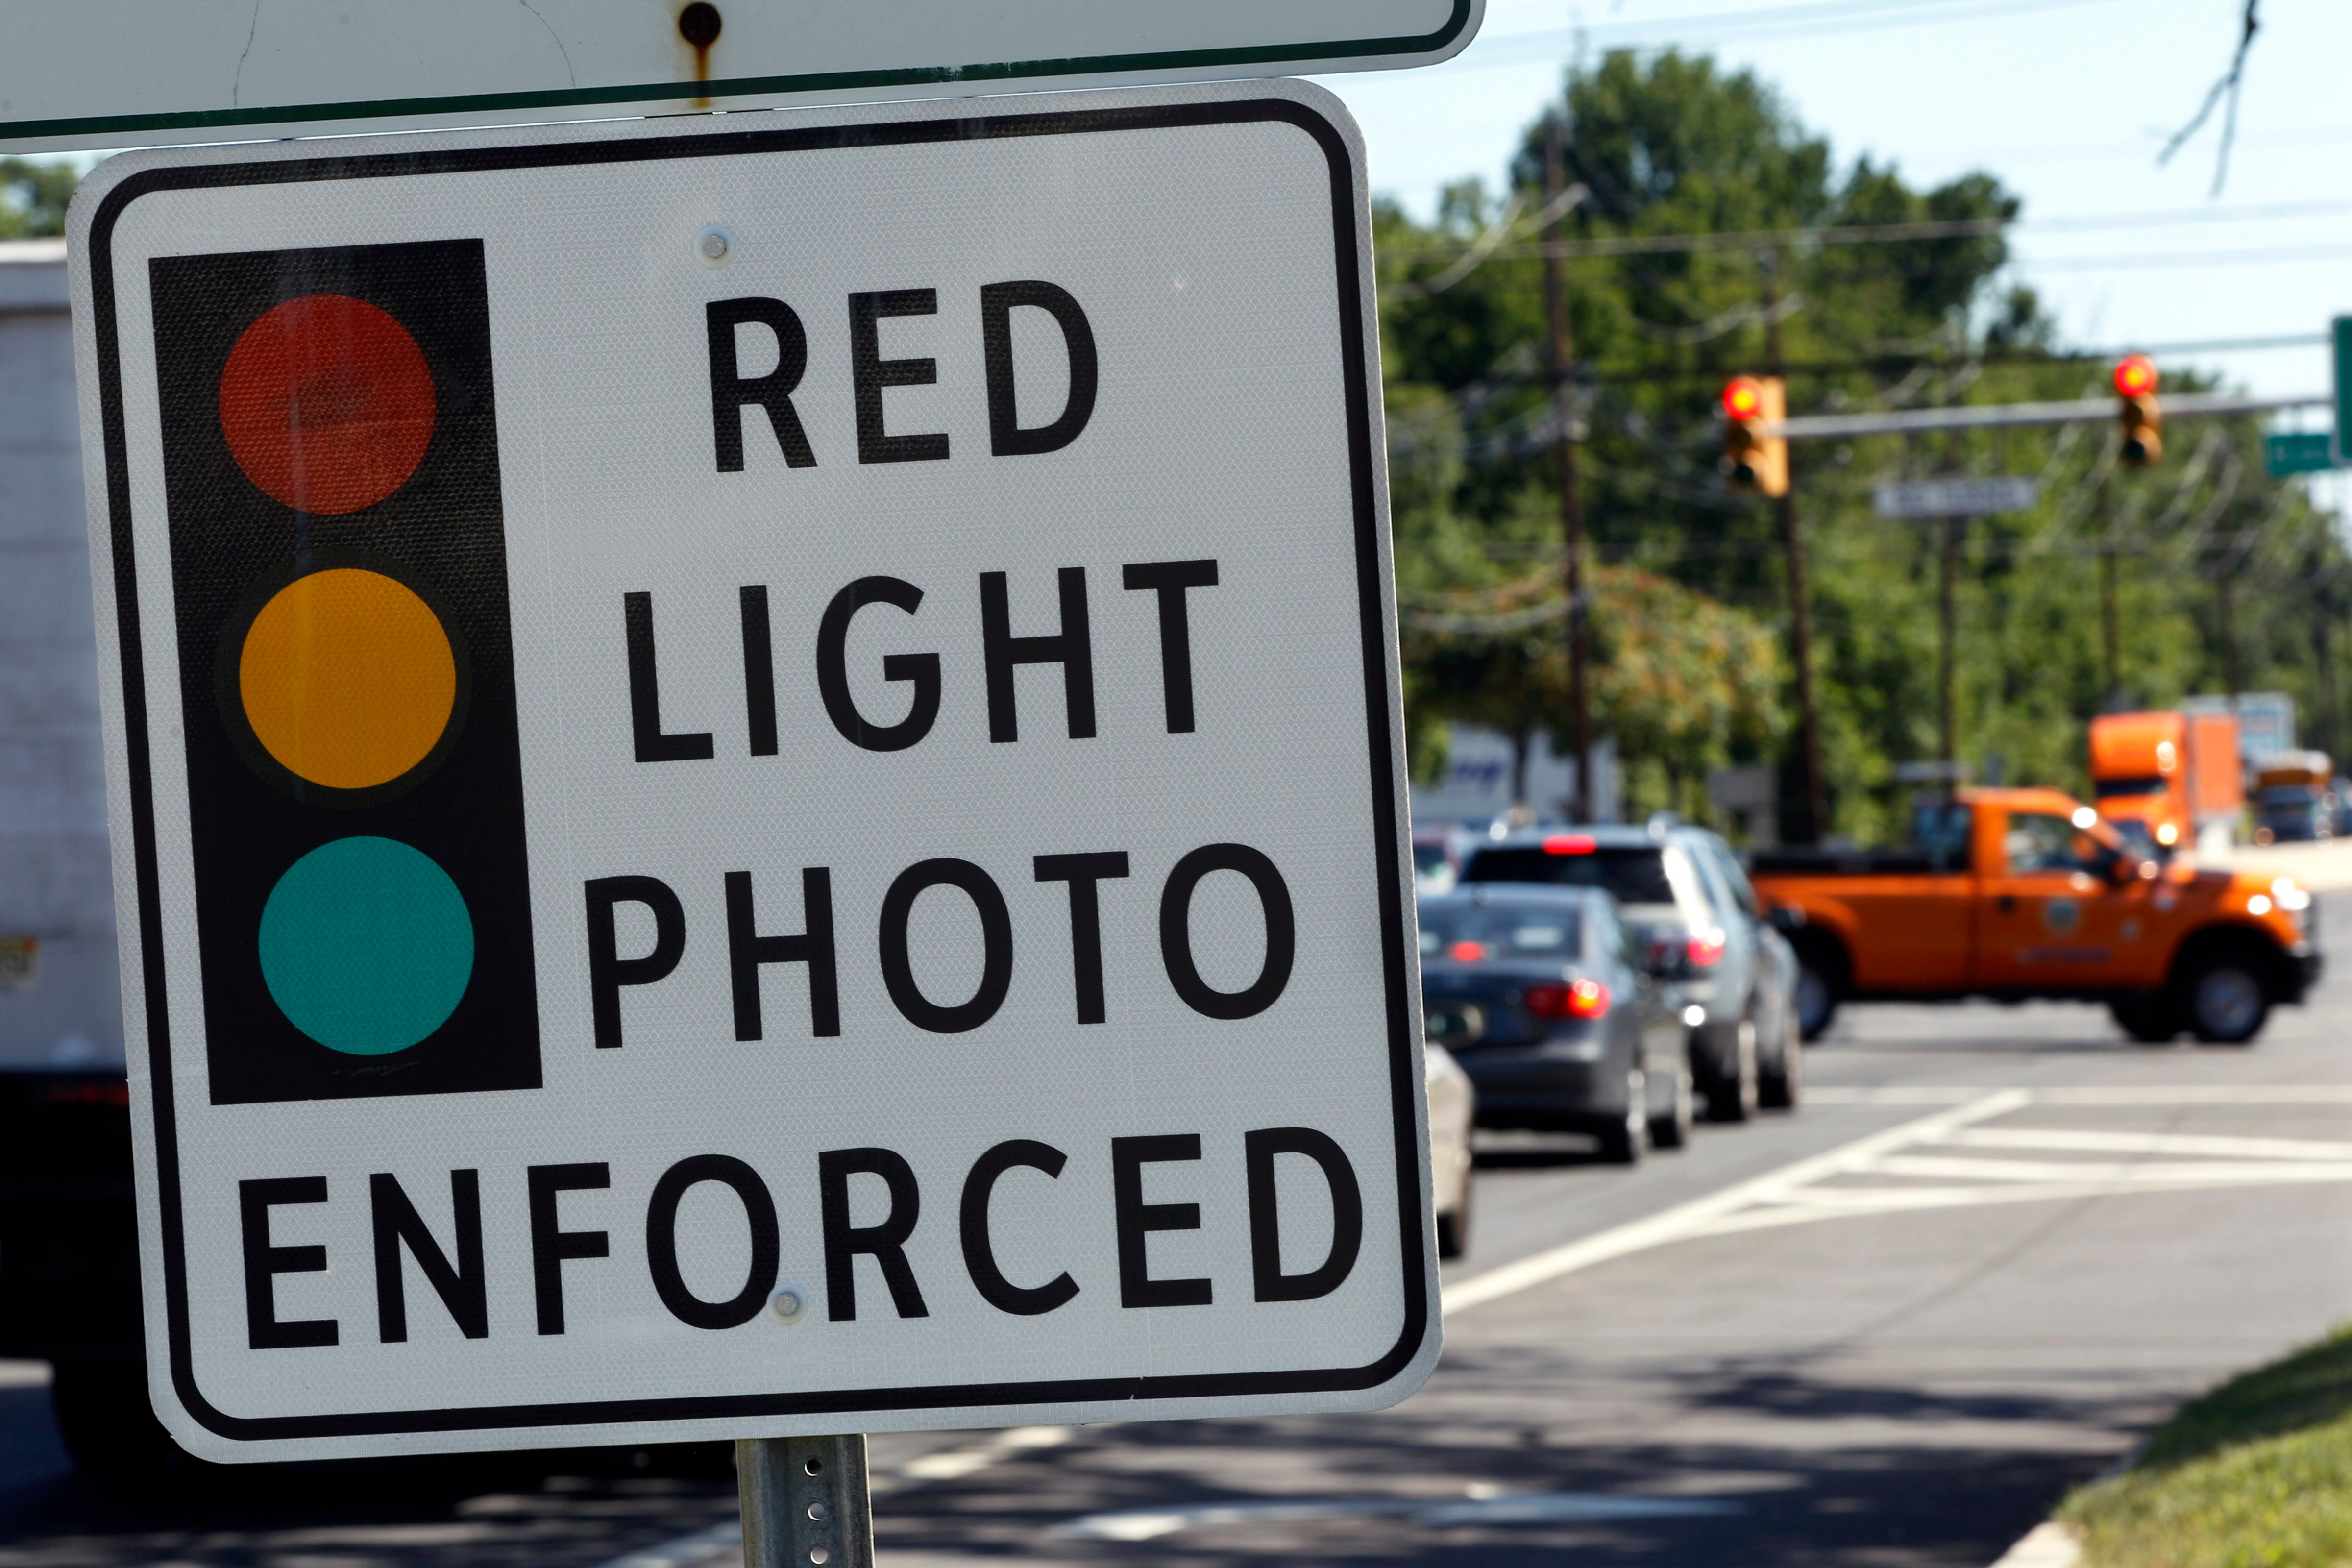 A red light photo enforcement sign is seen on Route 1 in Lawrence Township on July 25, 2012. New Jersey's red light camera pilot program will end Dec. 16, 2014. (Mel Evans—AP)